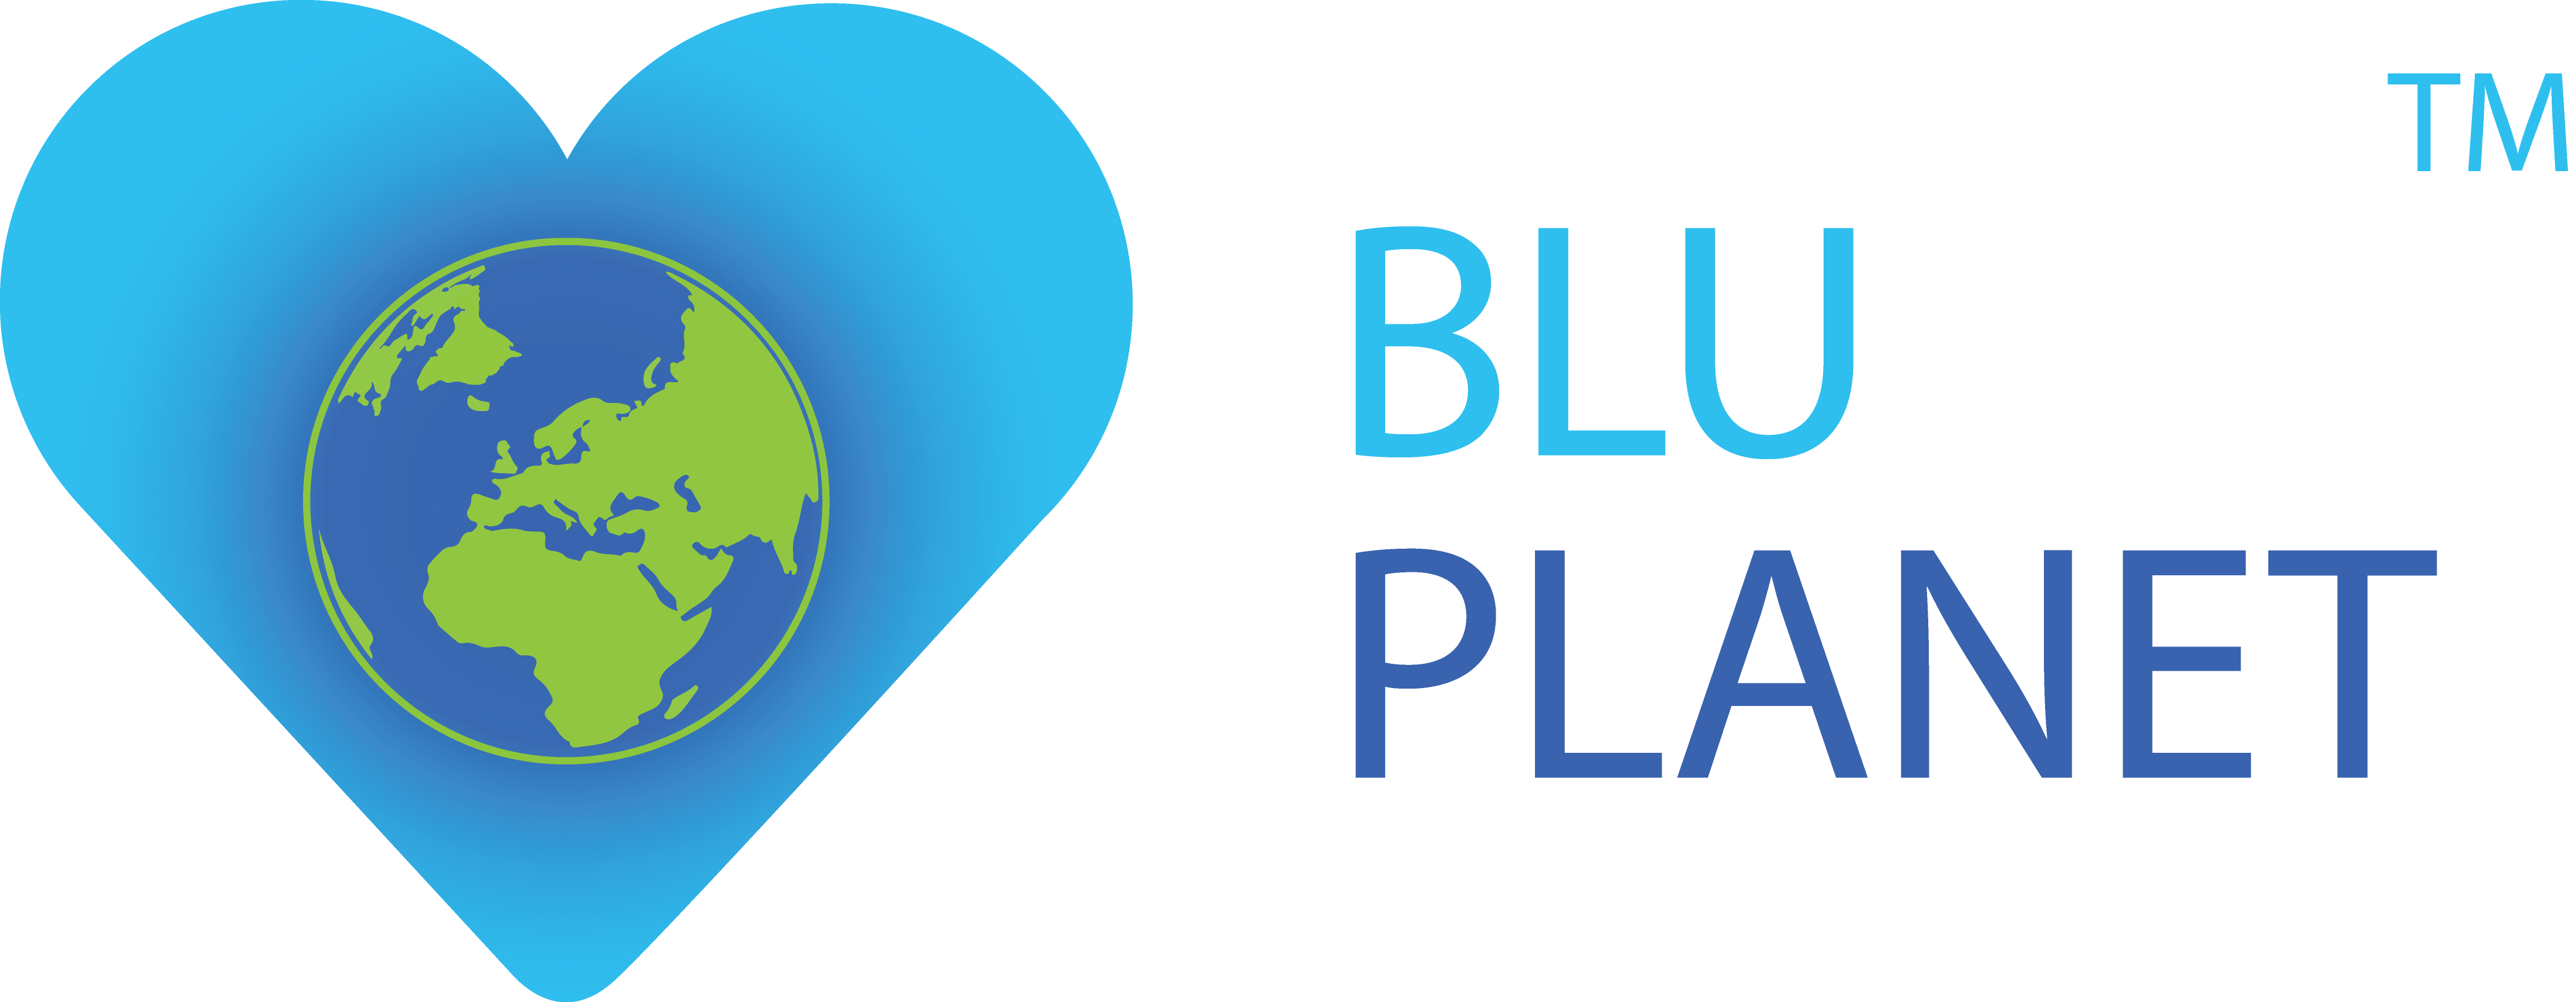 BLU PLANET TM (radial simple landscape with text)